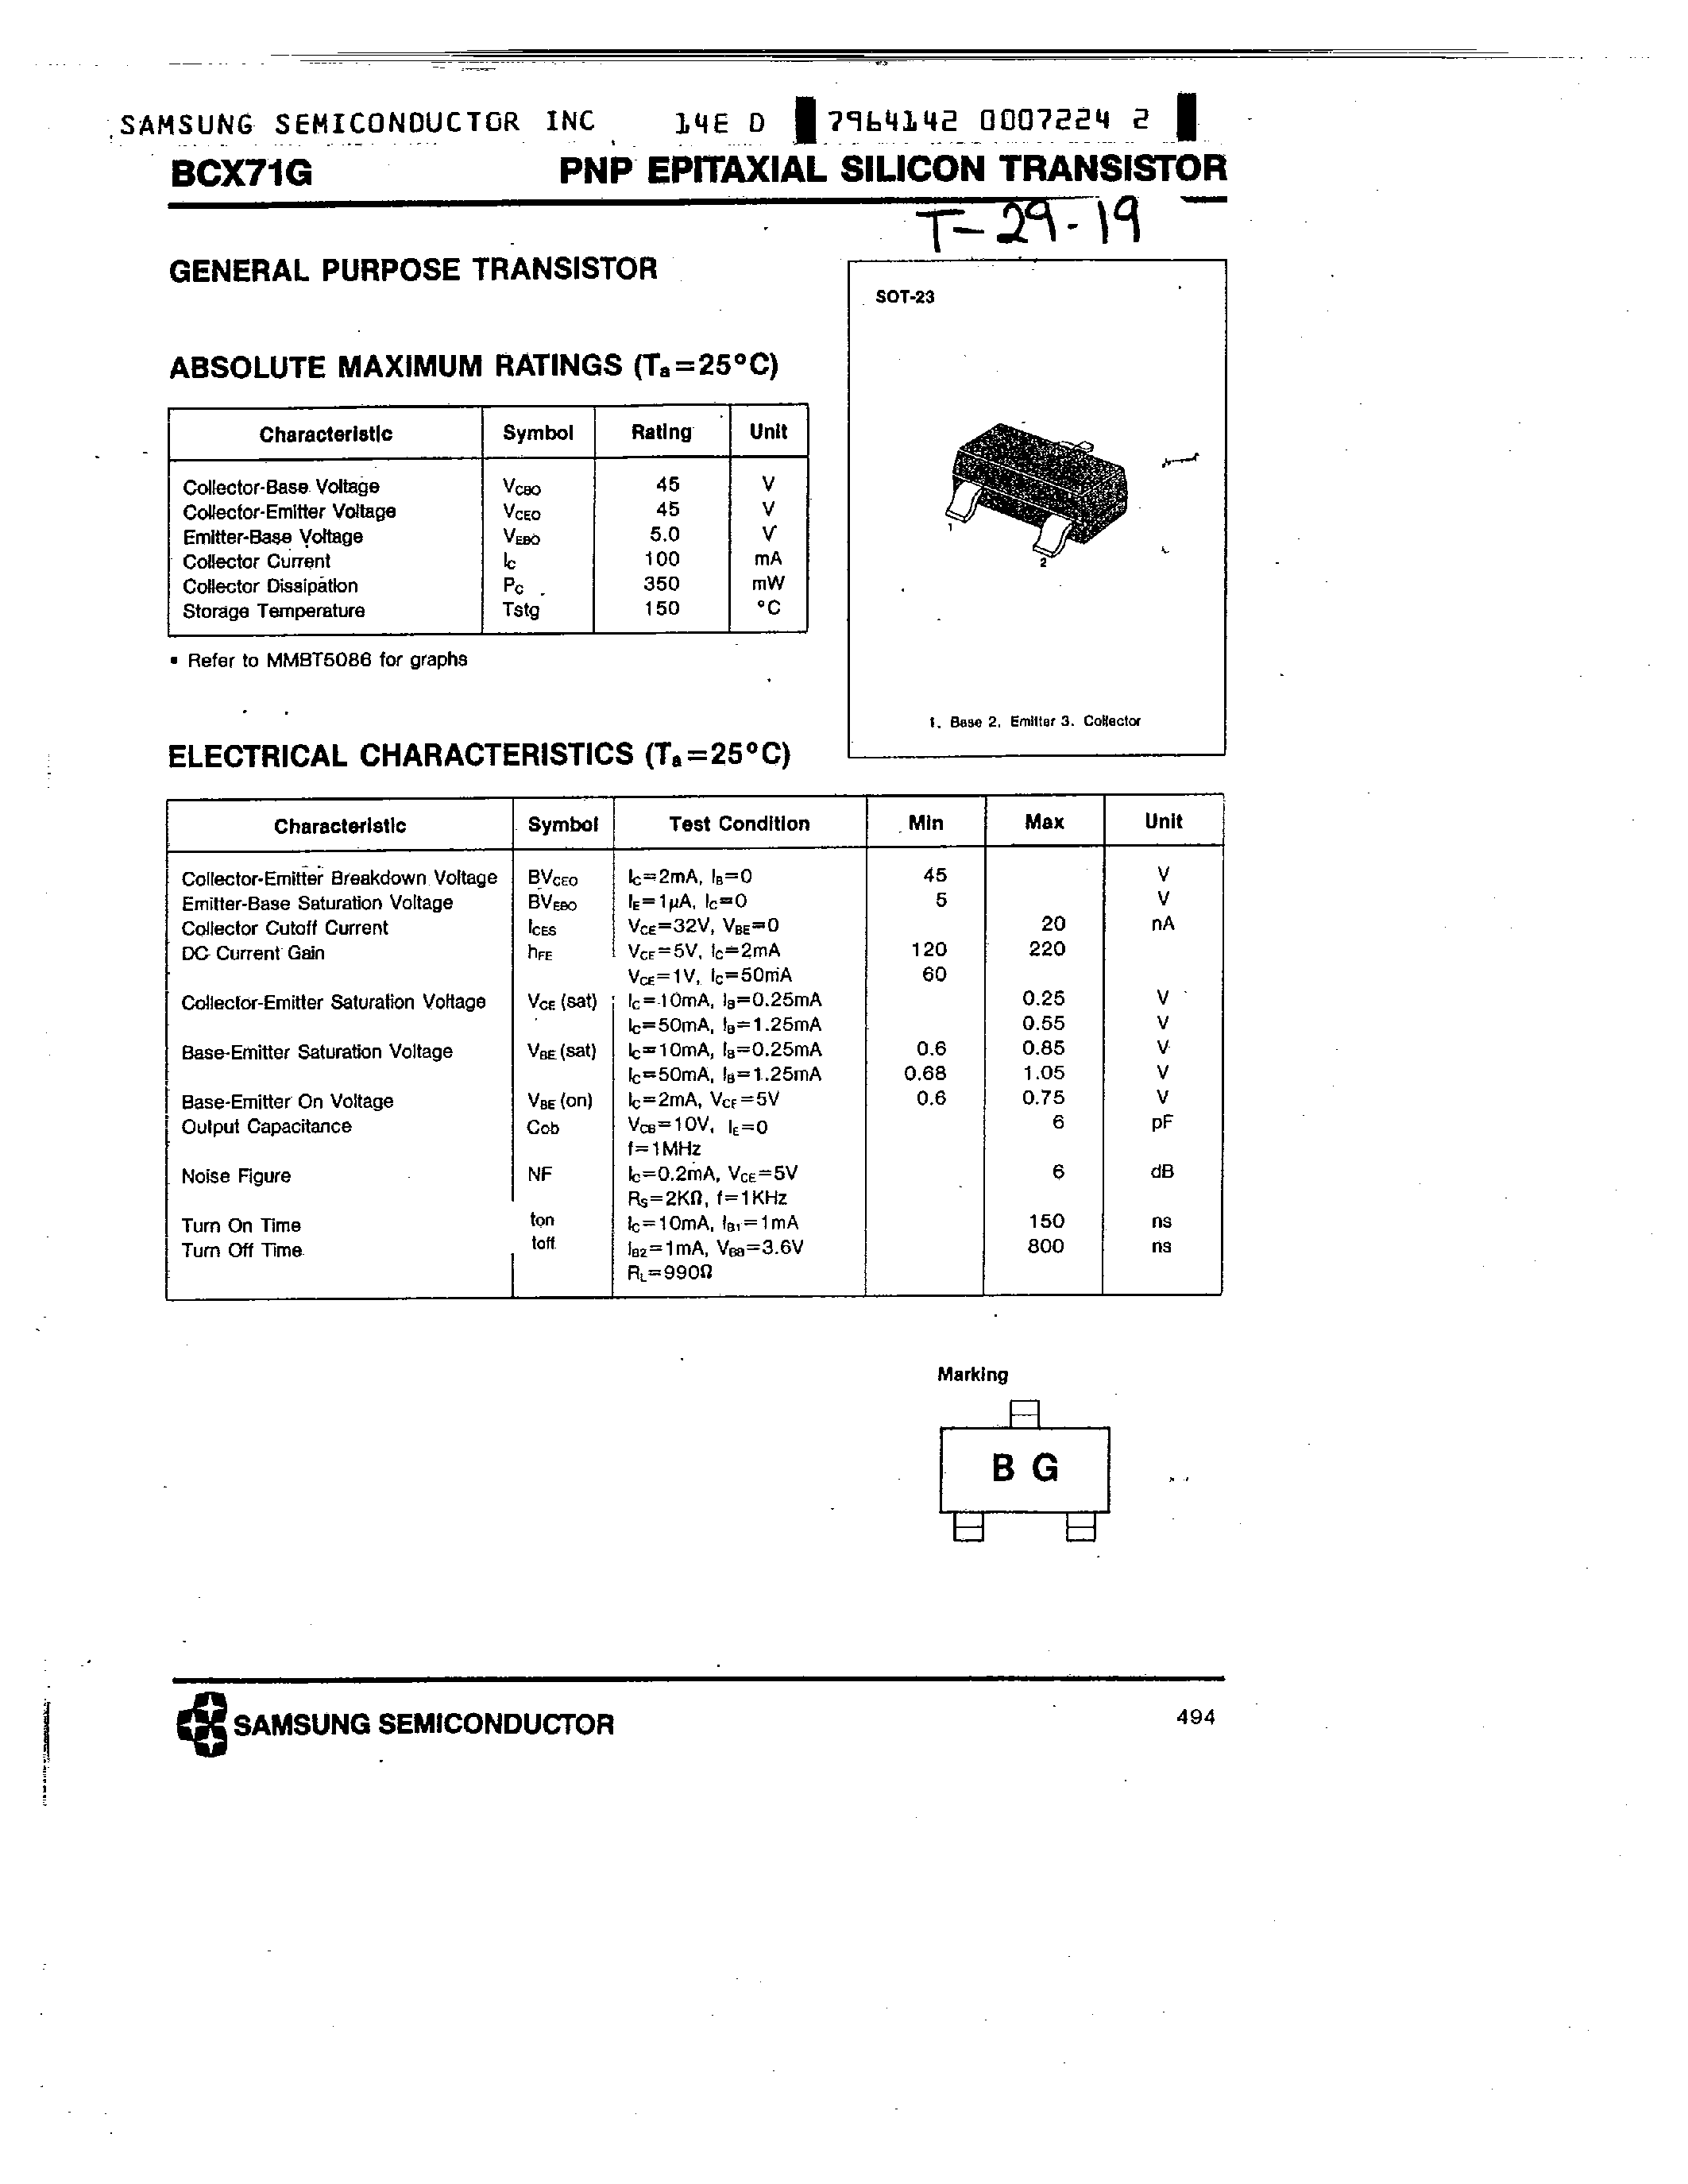 Datasheet BCX71G - PNP EPITAXIAL SILICON TRANSISTOR page 1